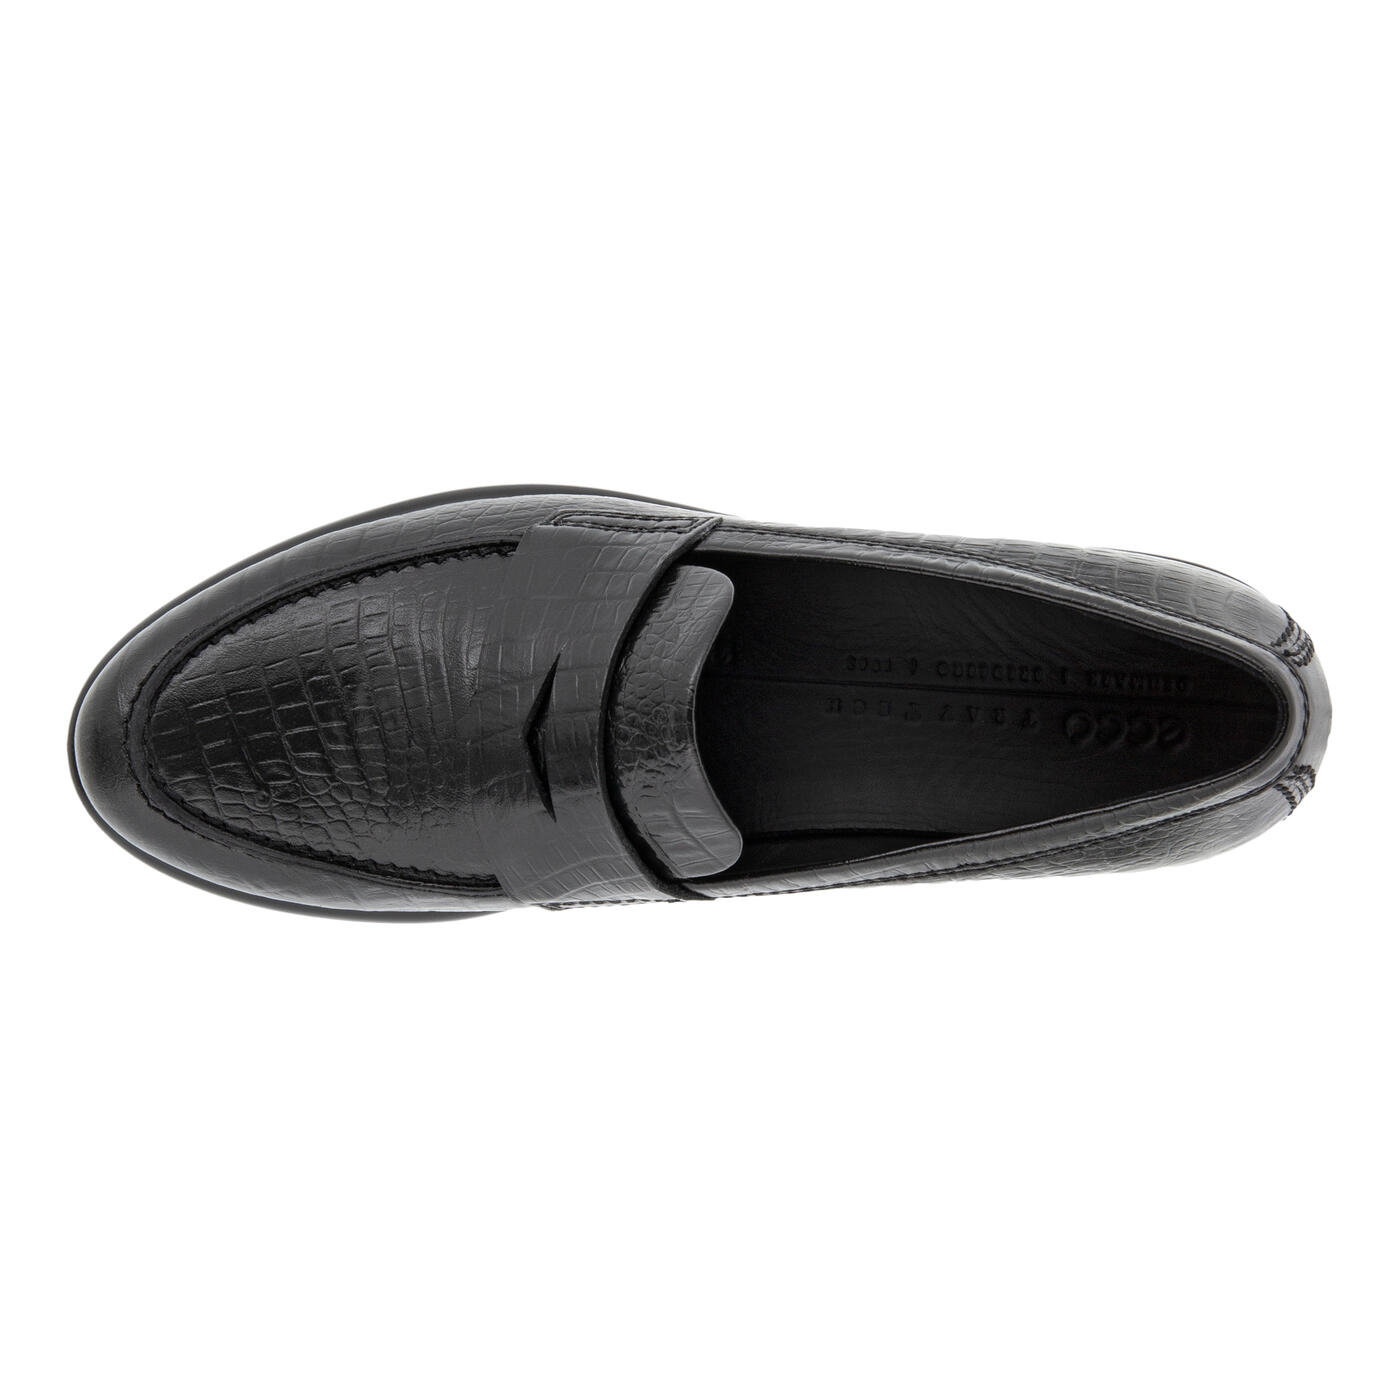 ECCO MODTRAY WOMEN'S PENNY LOAFER | Official ECCO® Shoes